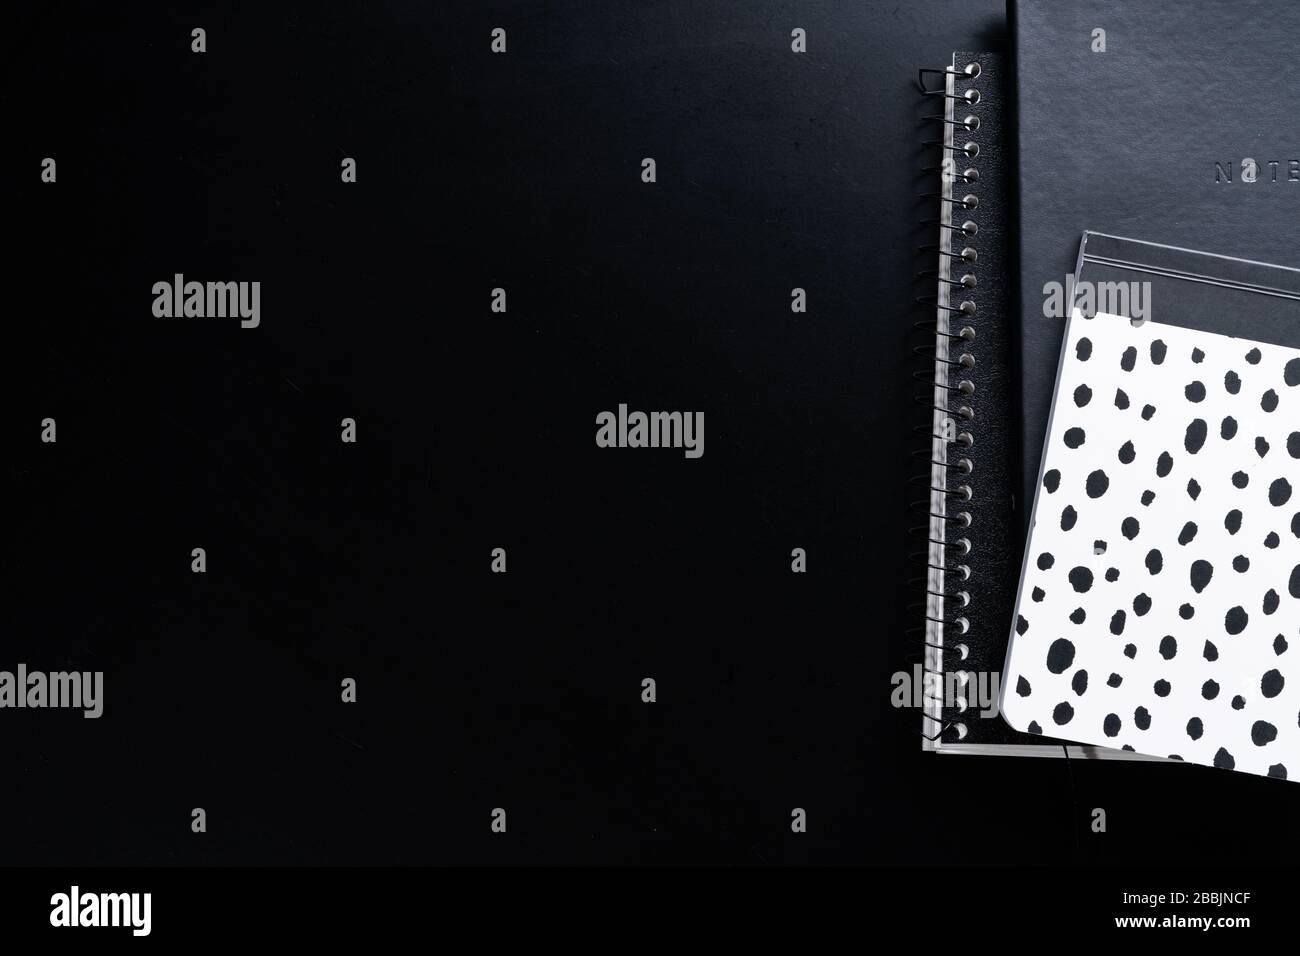 Black style set: notepad, pen and paper clips on Black background Stock Photo